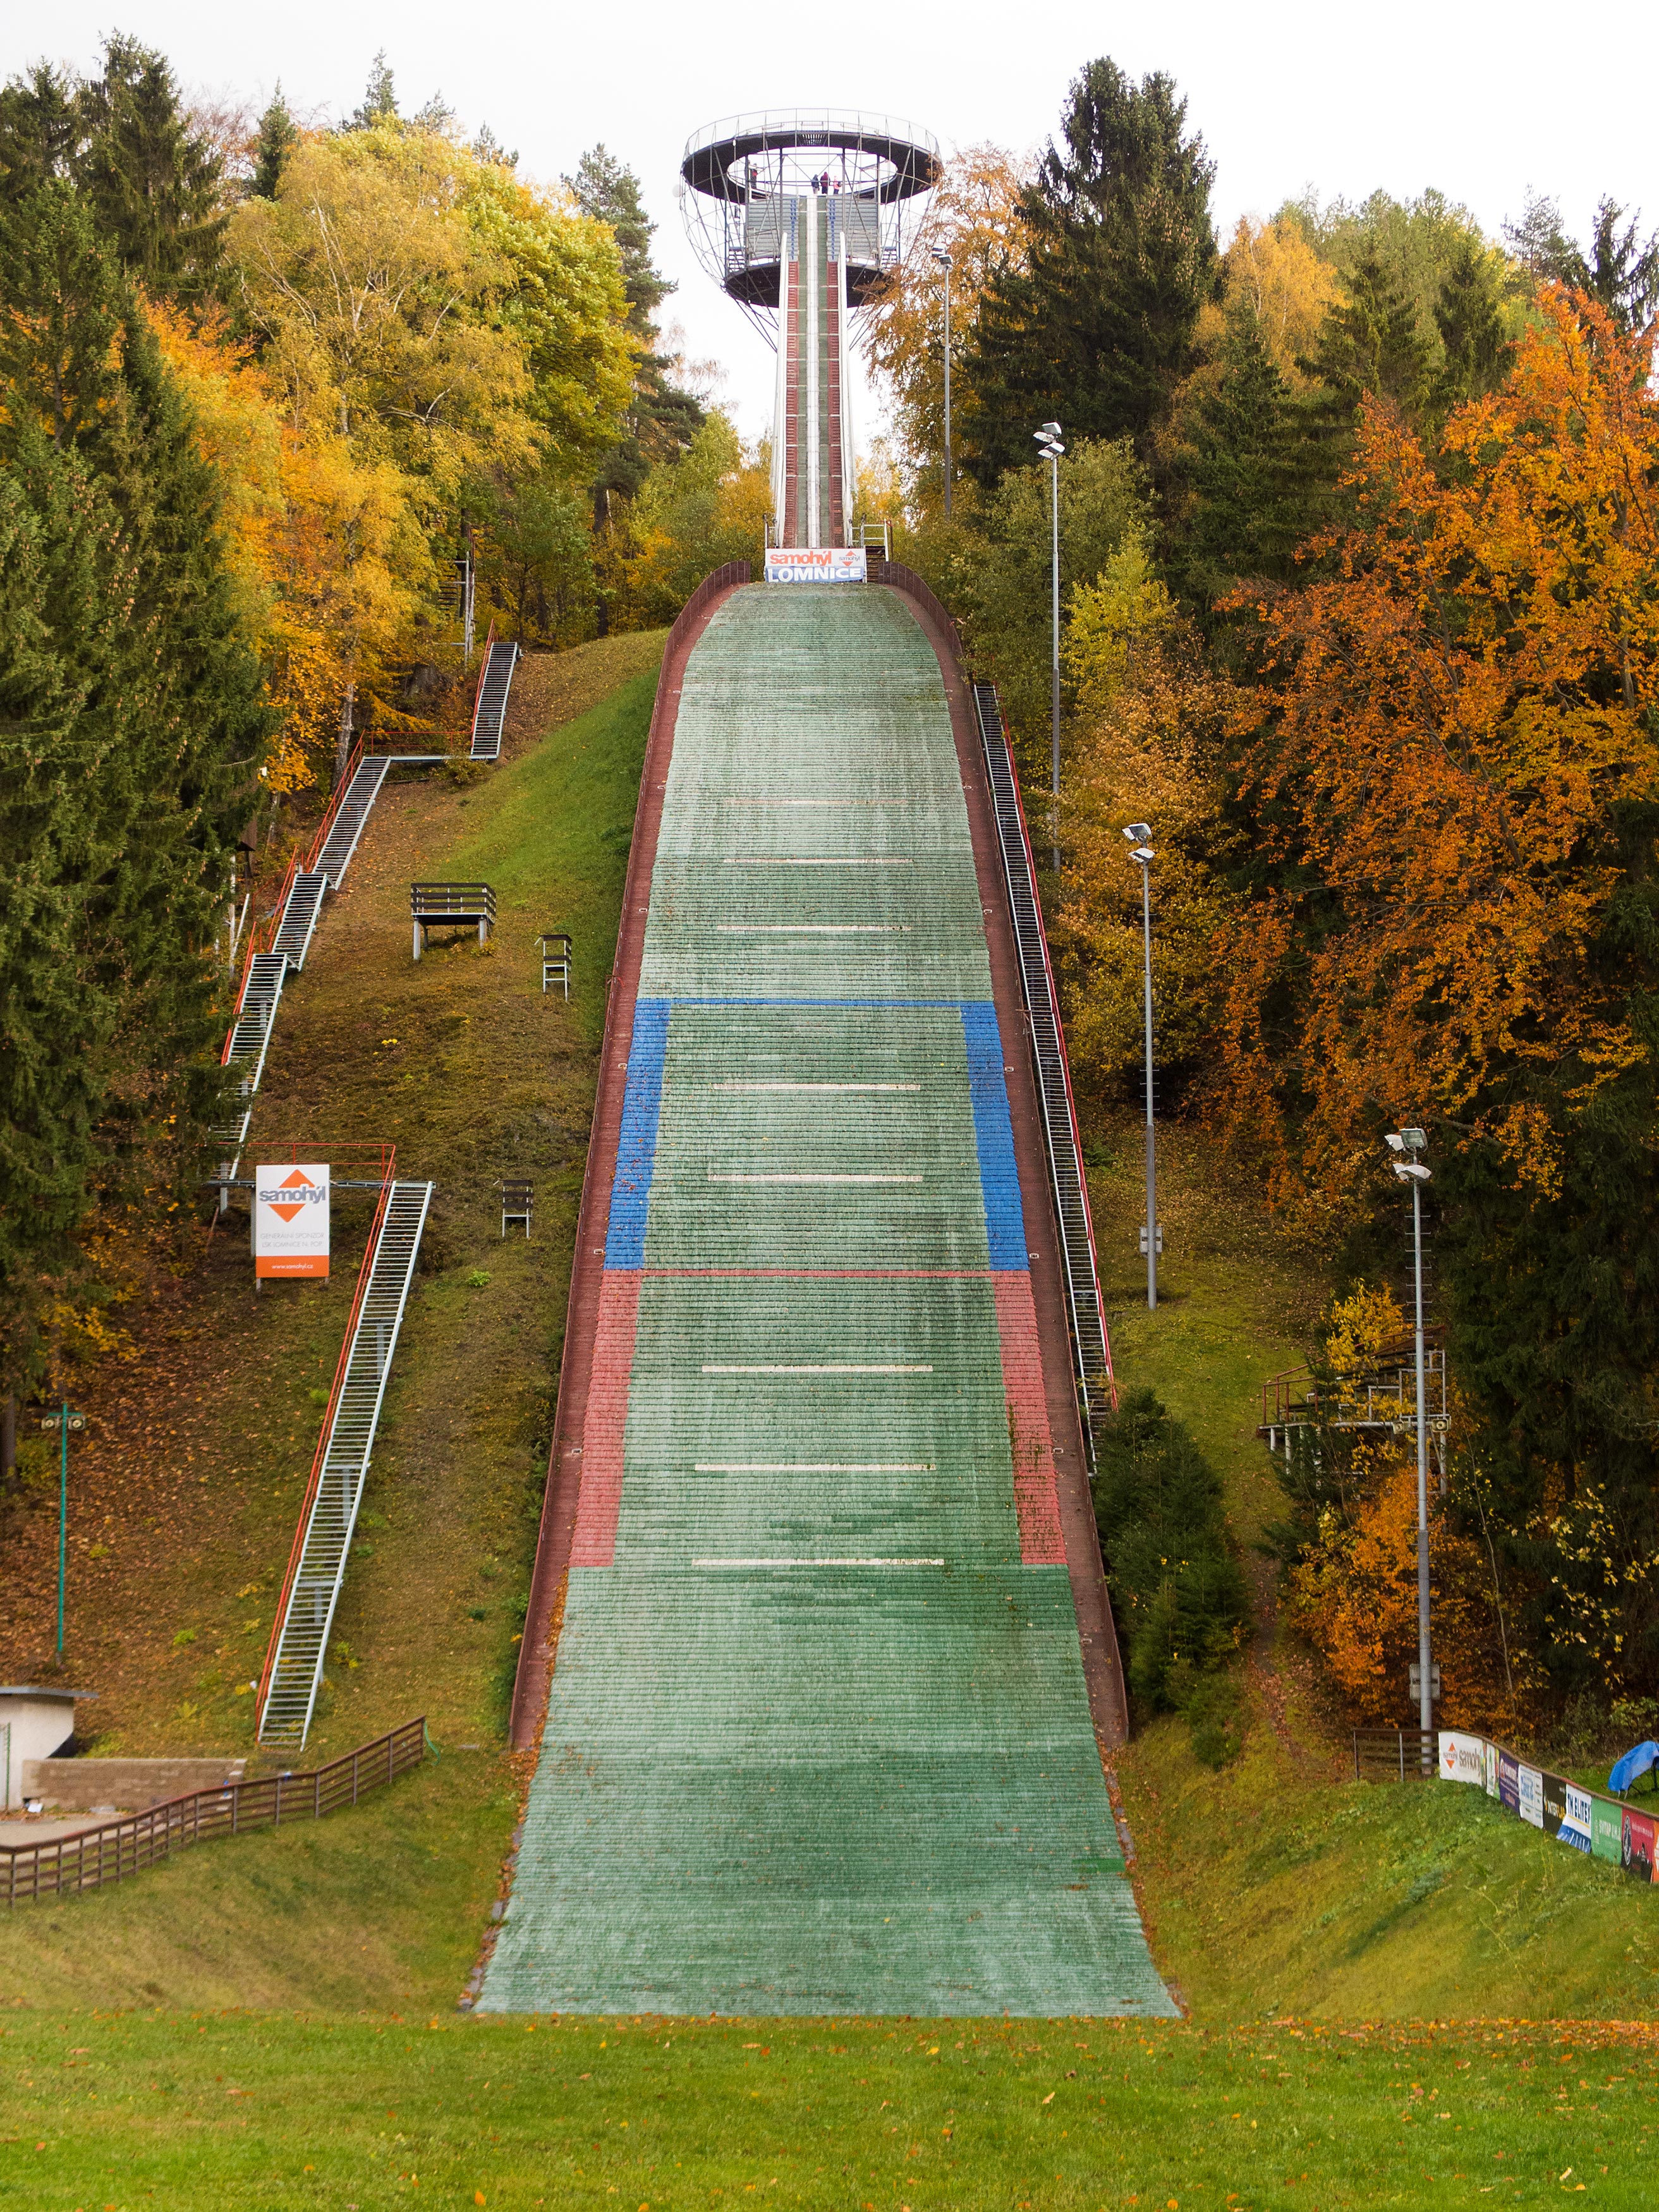 Ski Jumping Hill Without Snow Copyright-free photo (by M